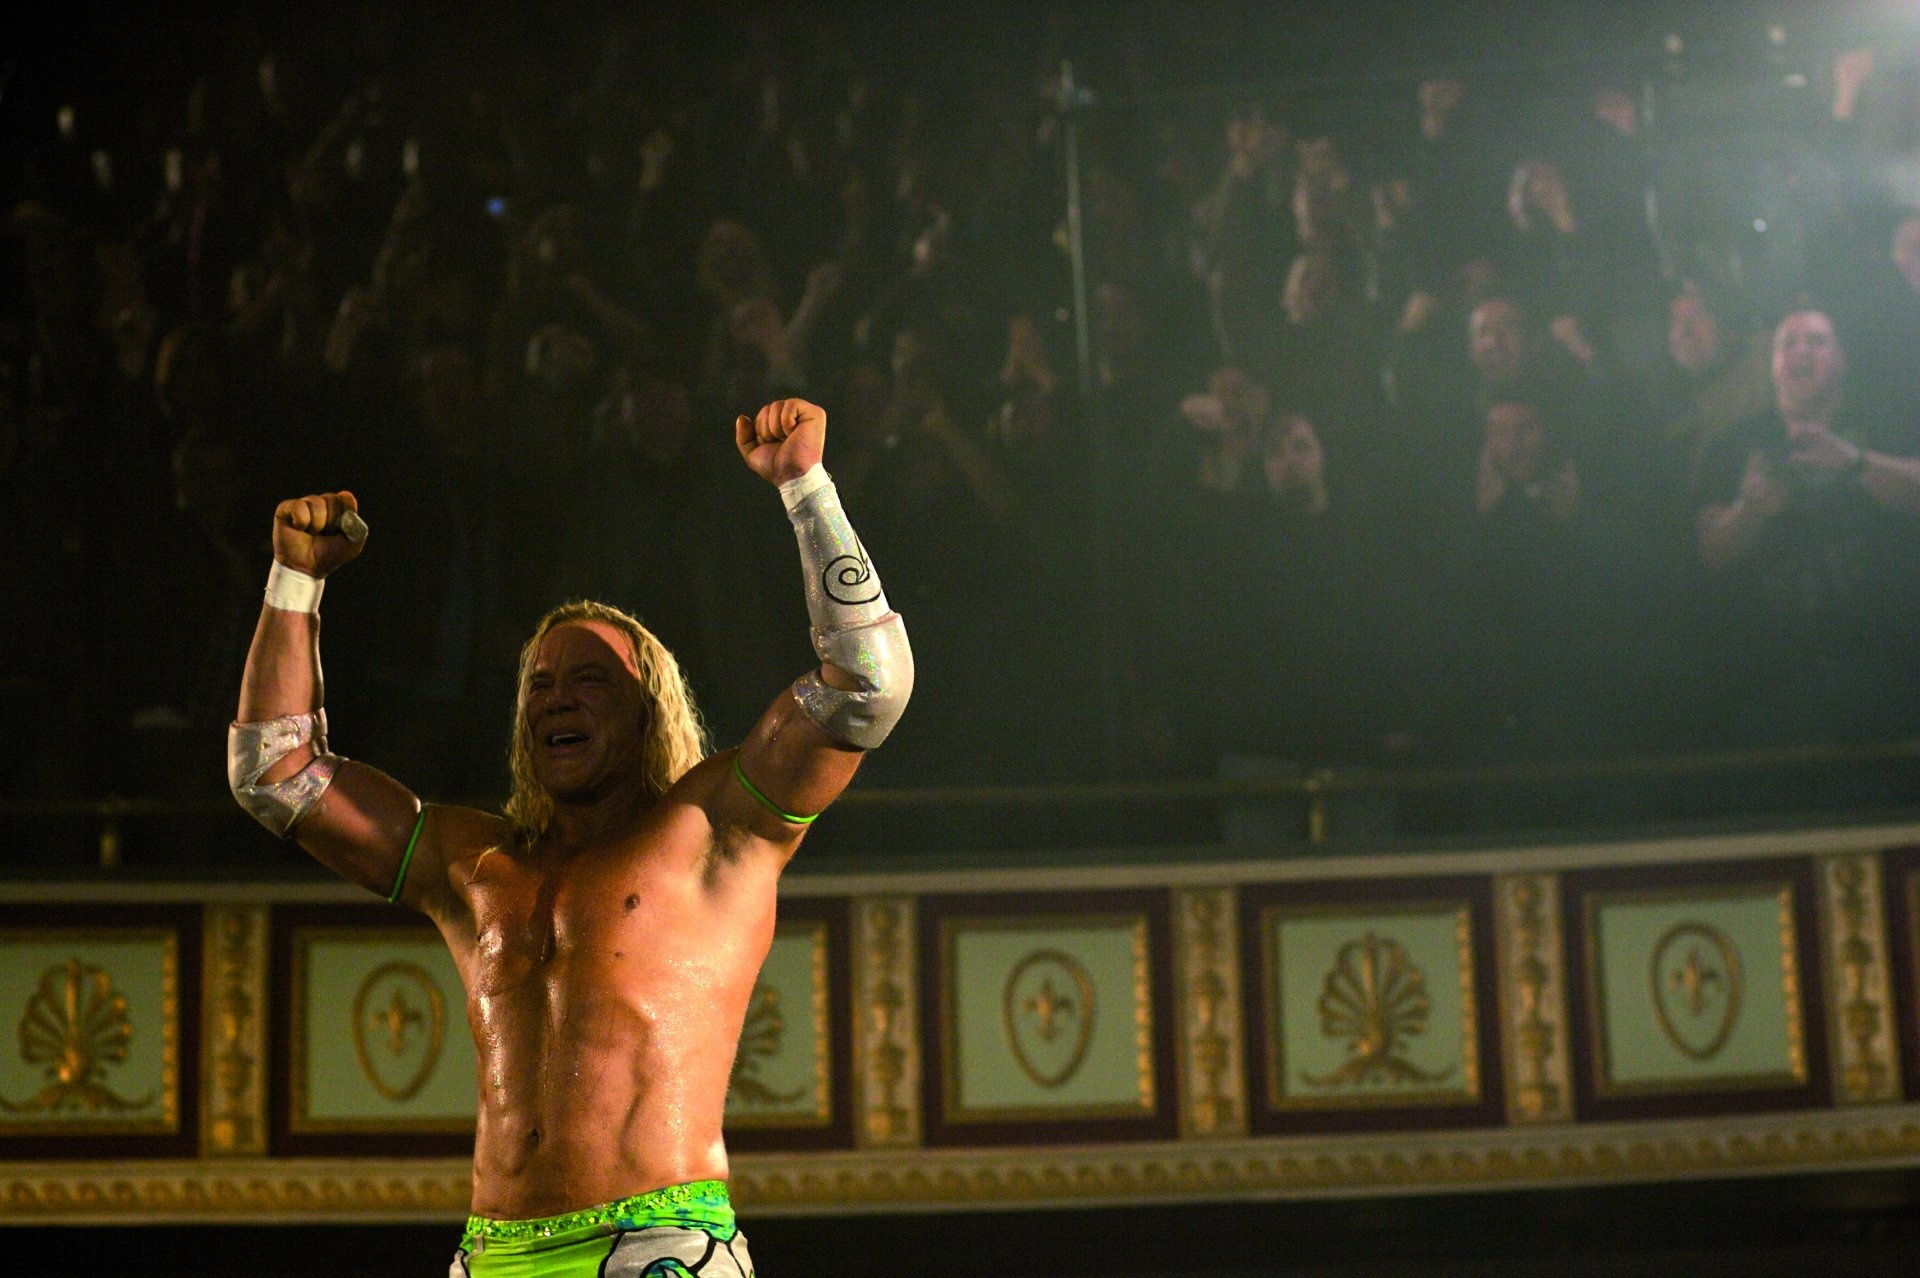 The Wrestler, HD wallpapers, Background images, Mickey Rourke's iconic role, 1920x1280 HD Desktop